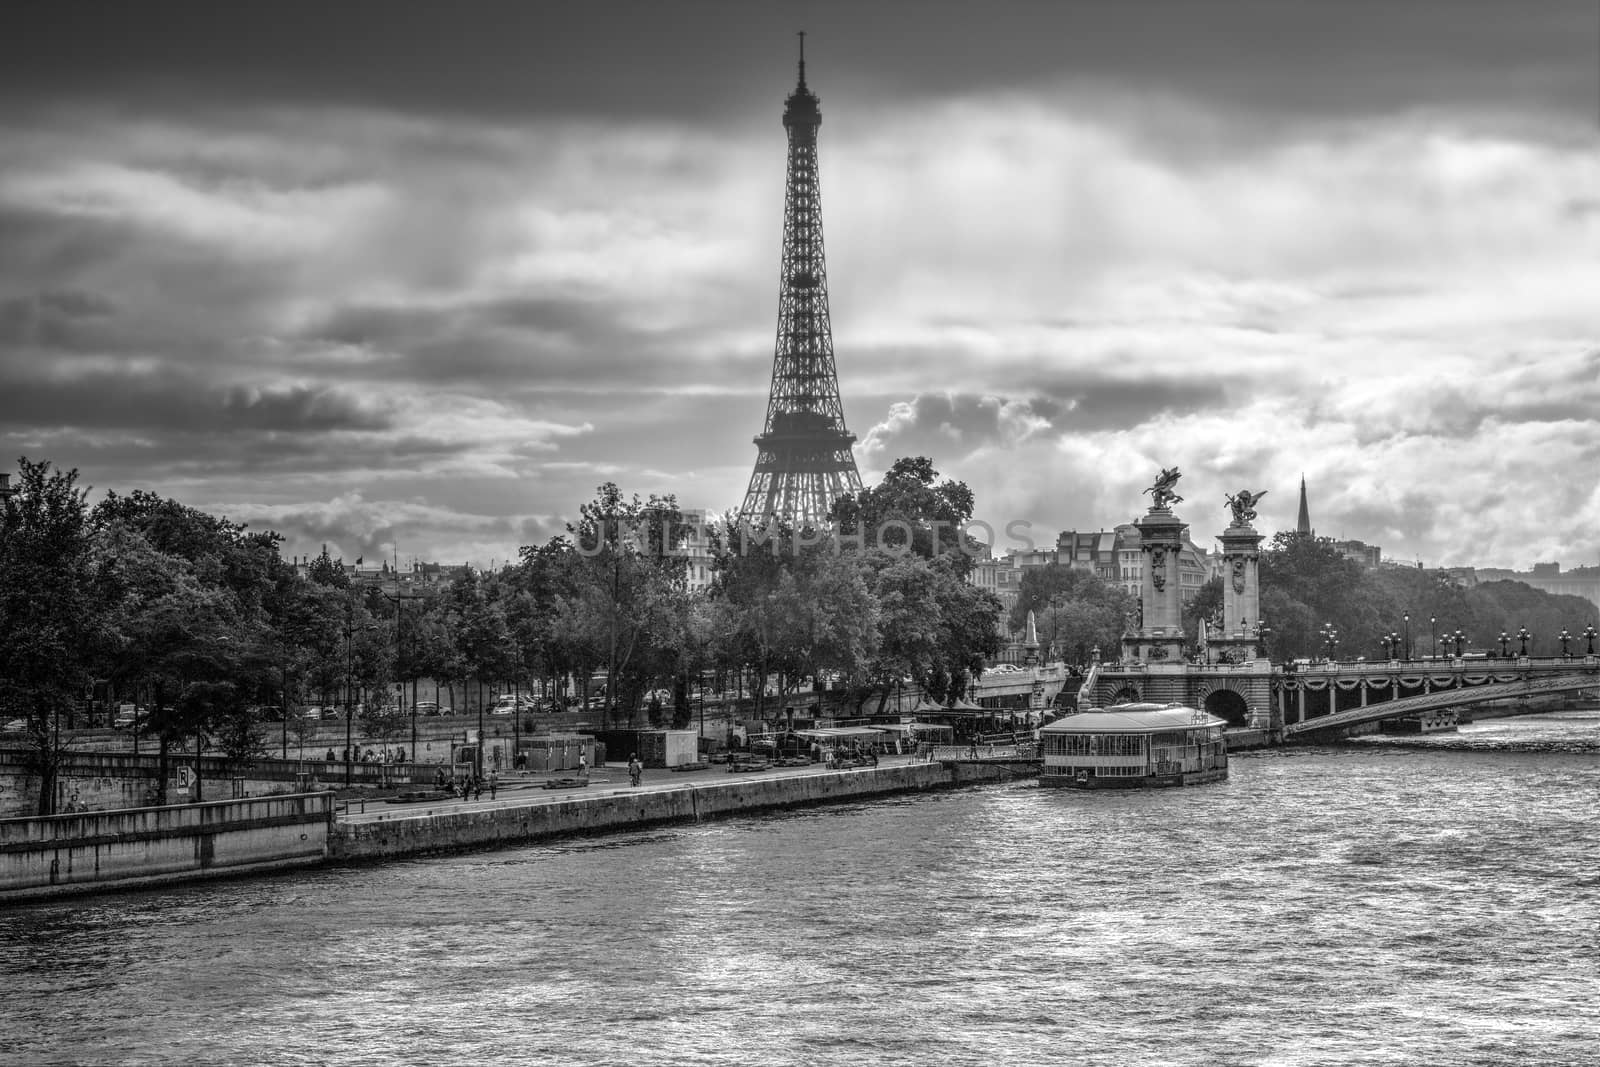 Eiffel tower and its surroundings by Dermot68